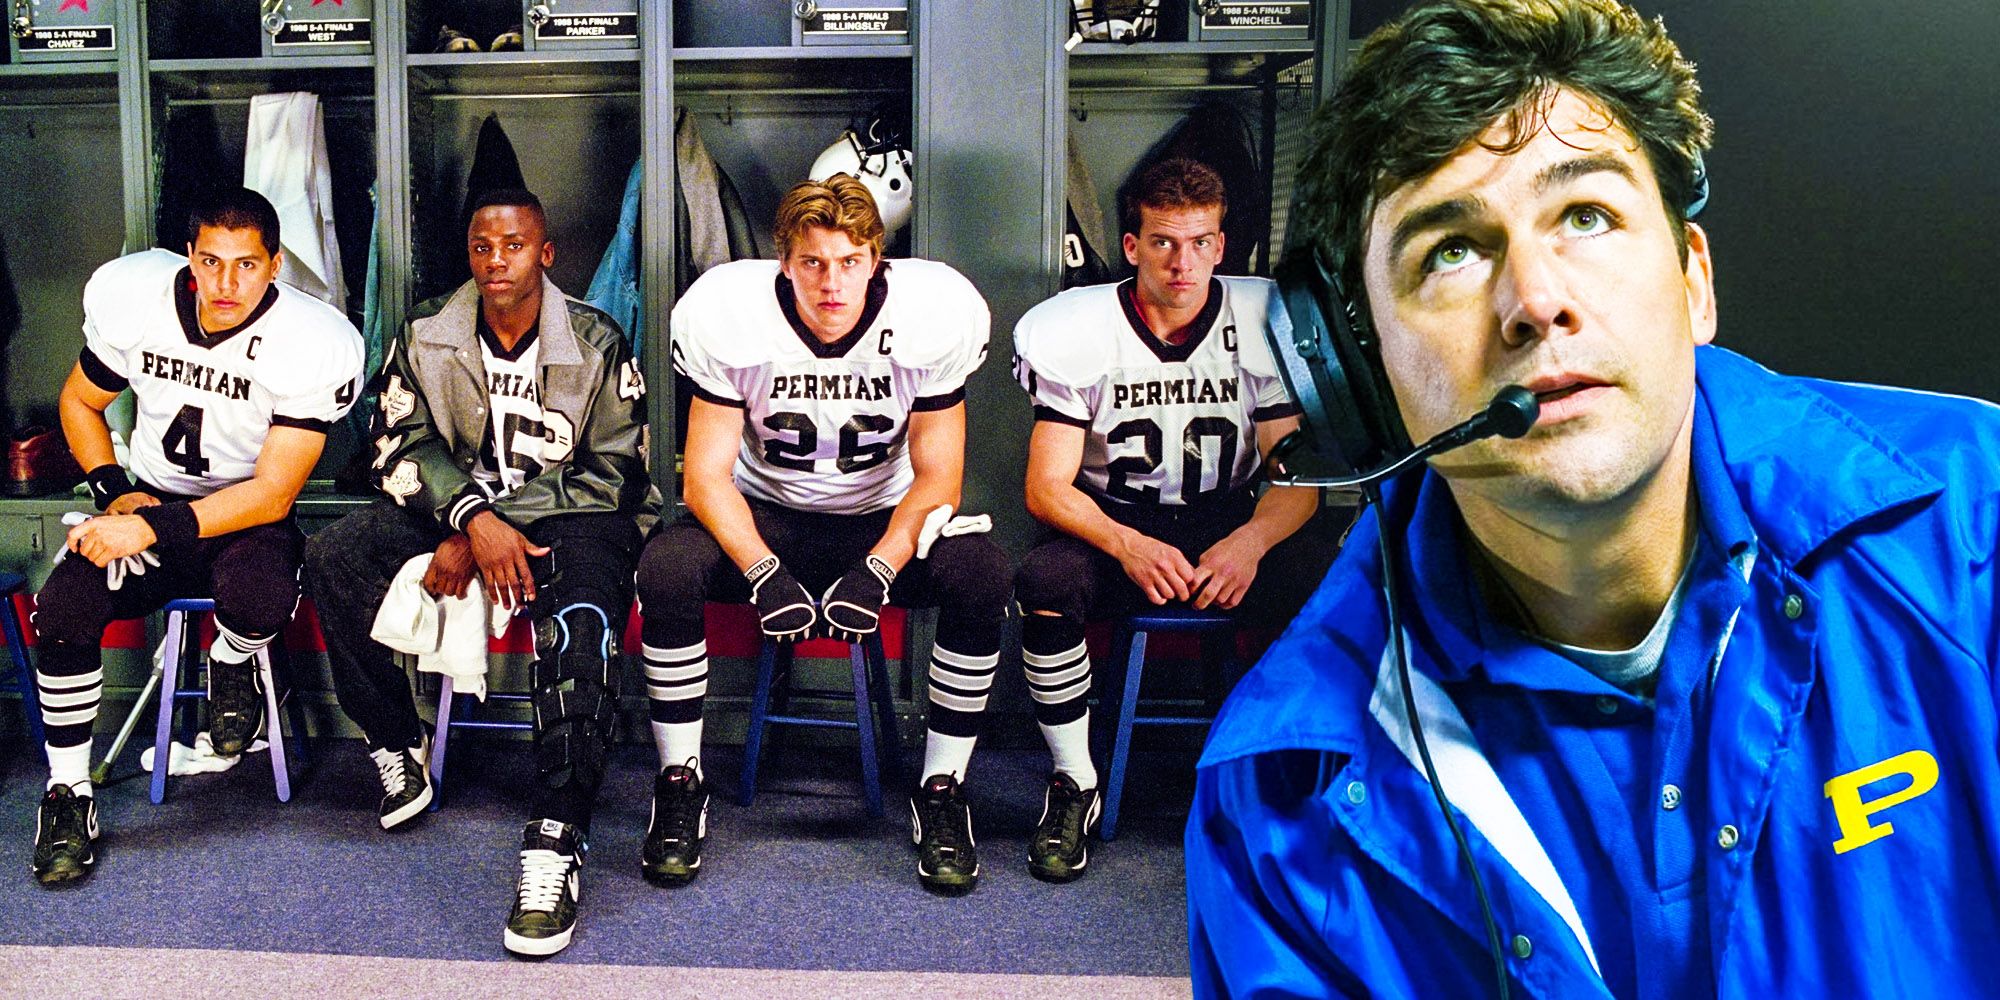 Everything We Know About the 'Friday Night Lights' Reboots - A New Friday  Night Lights TV Show and Movie Are Coming